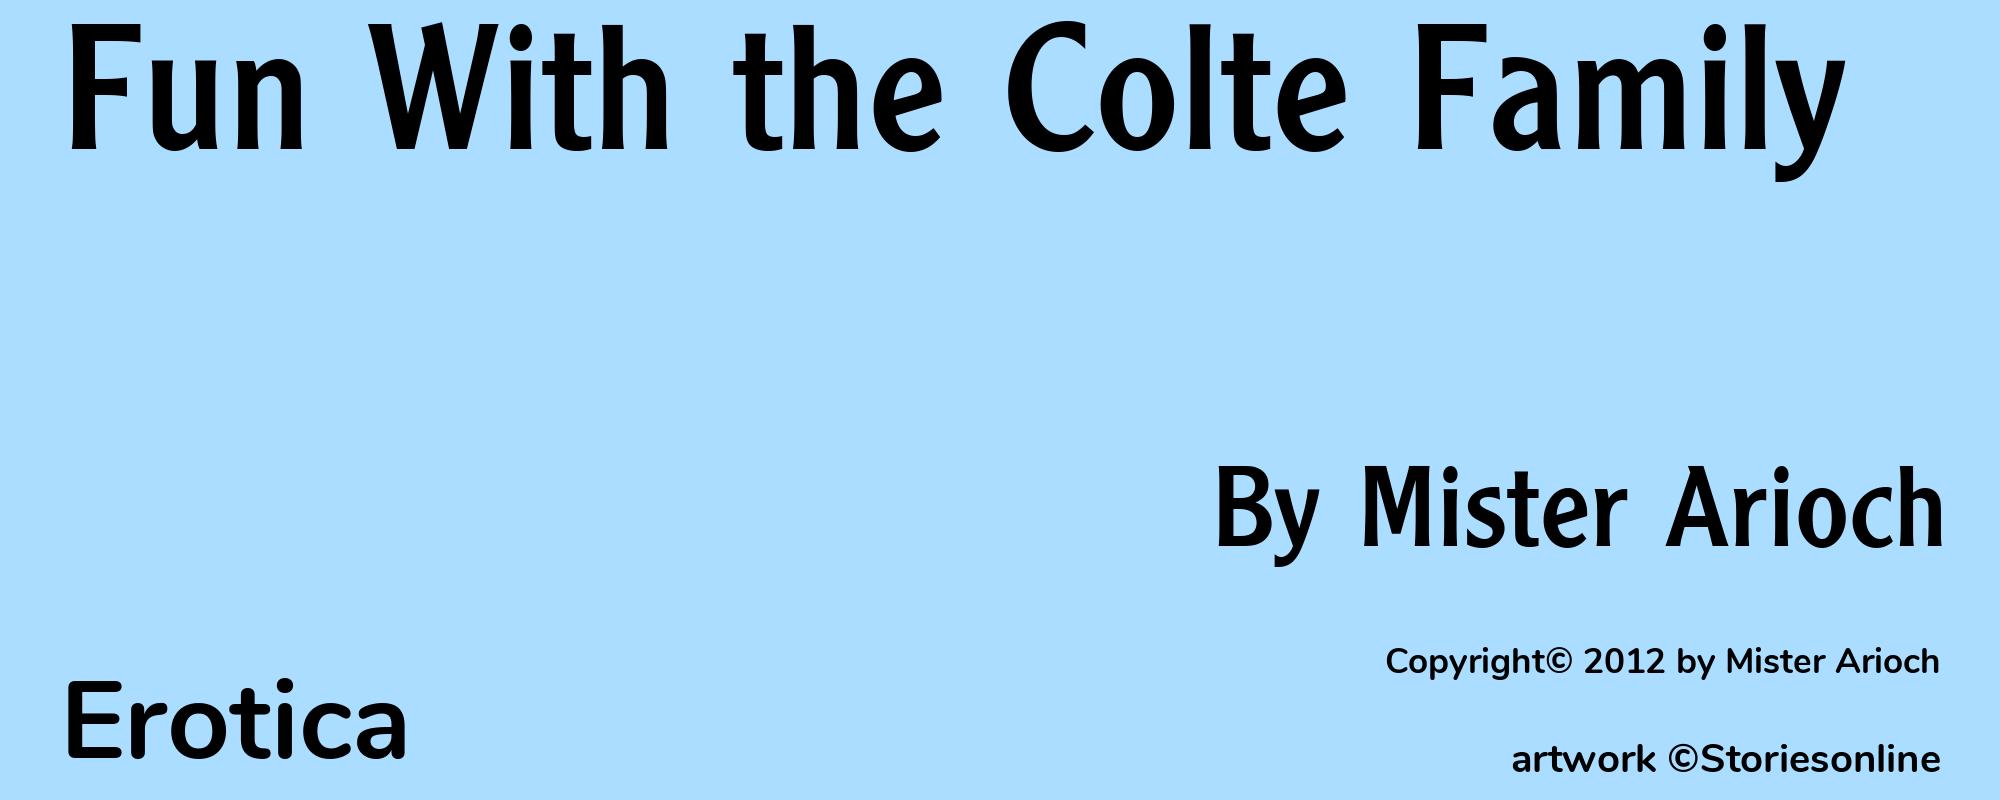 Fun With the Colte Family - Cover